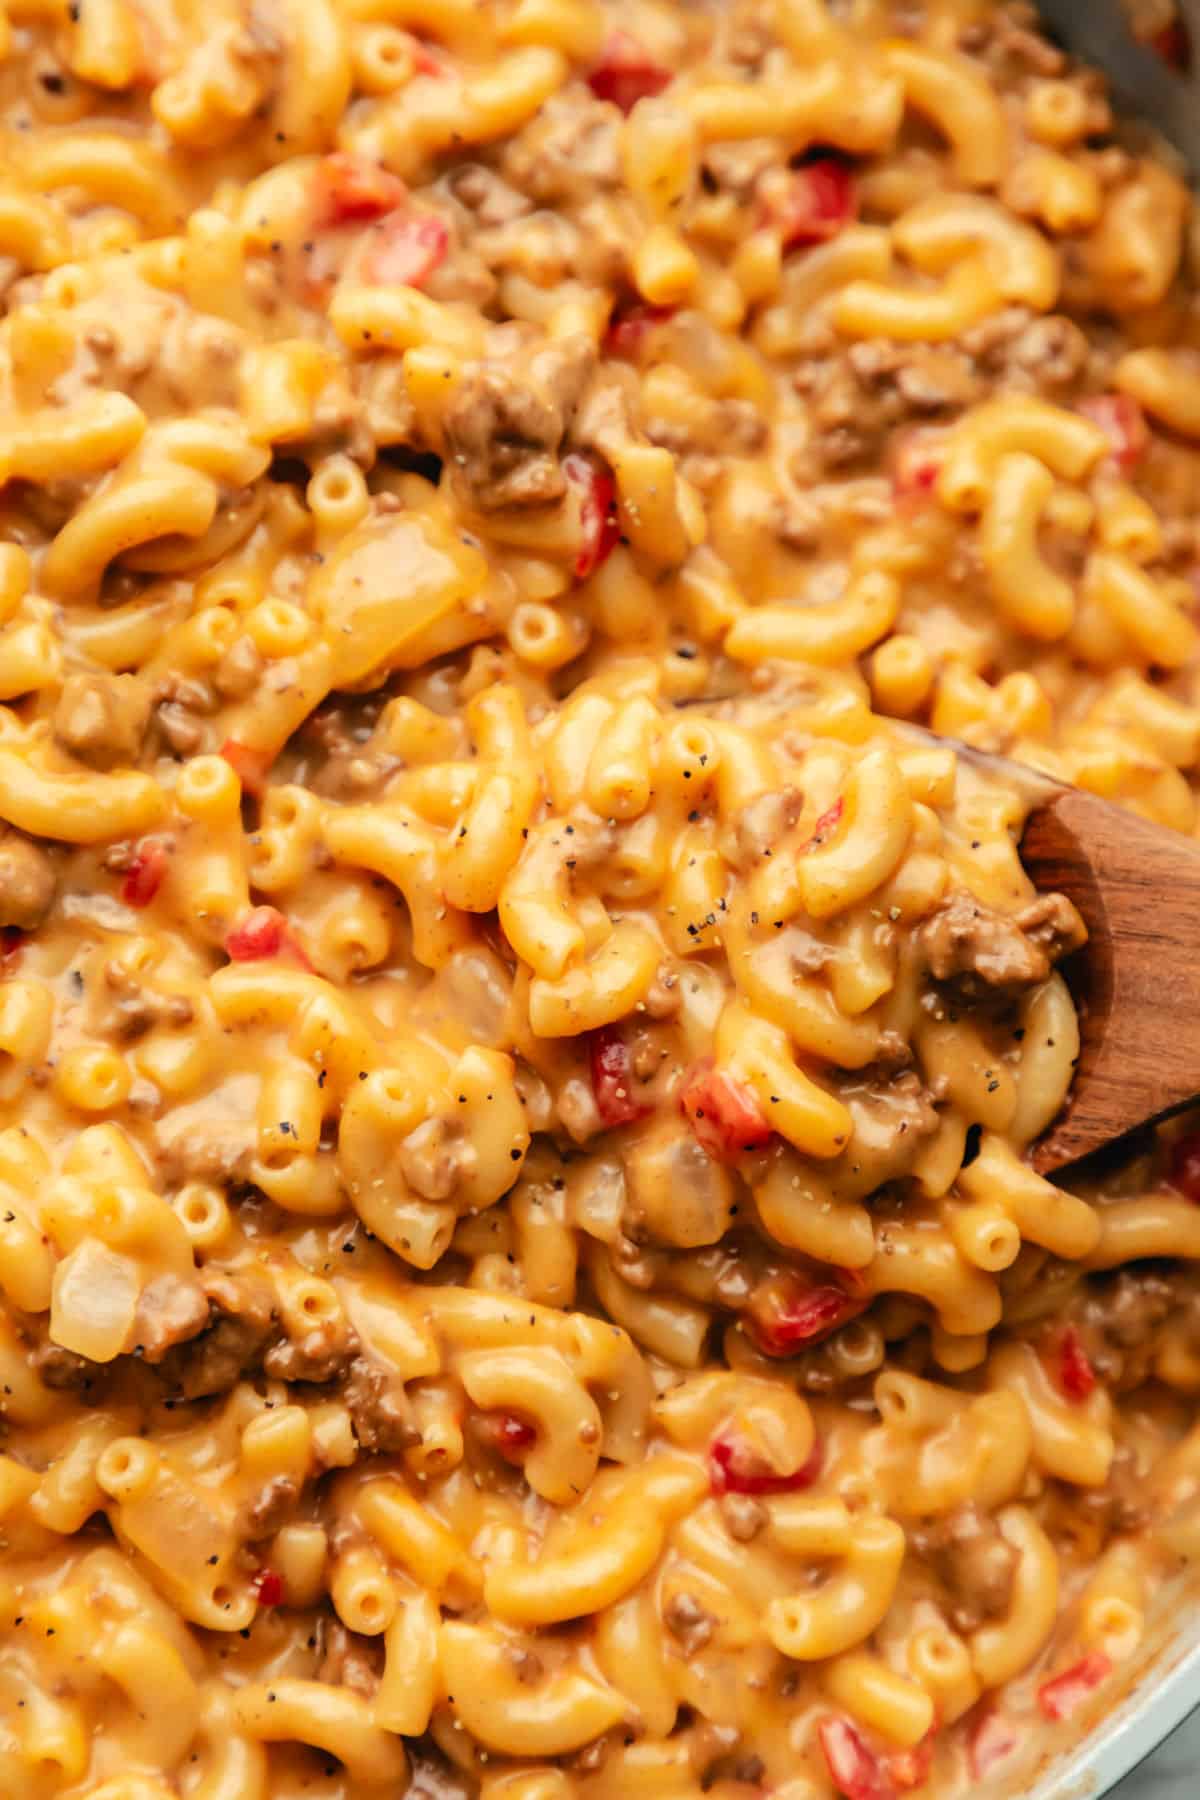 A wooden spoon scooping up cheeseburger macaroni.